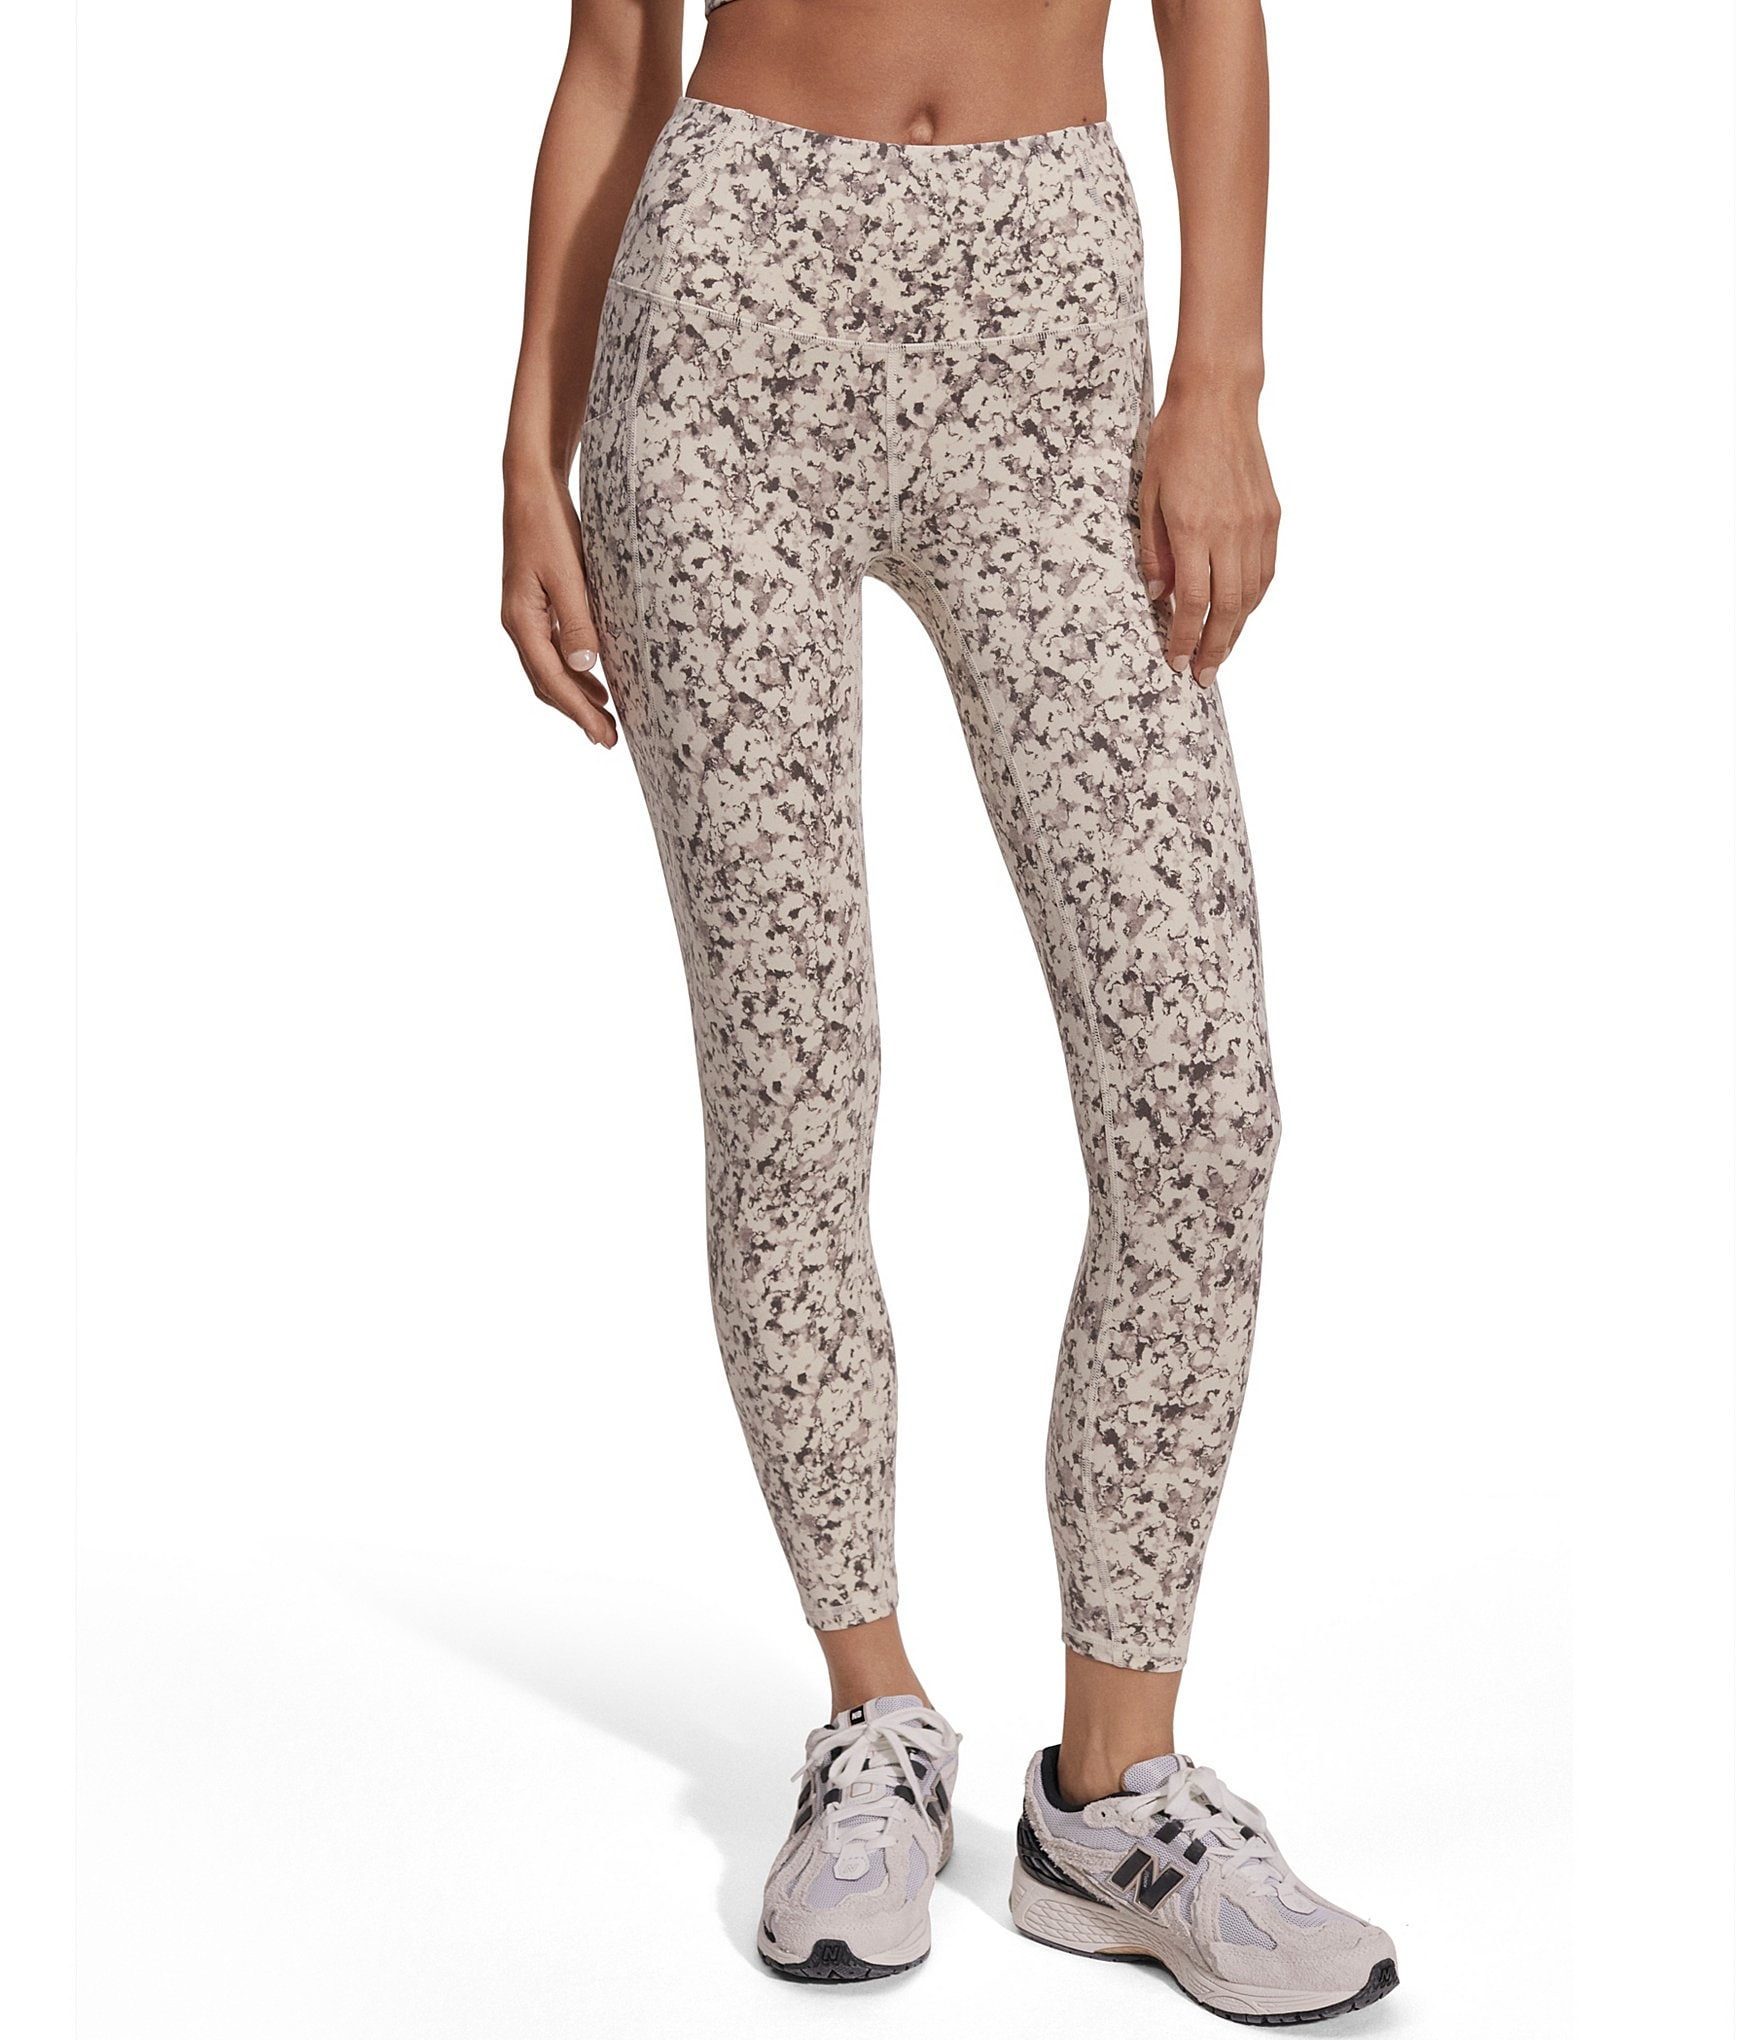 Buy Solid Cropped Leggings with Elasticised Waistband